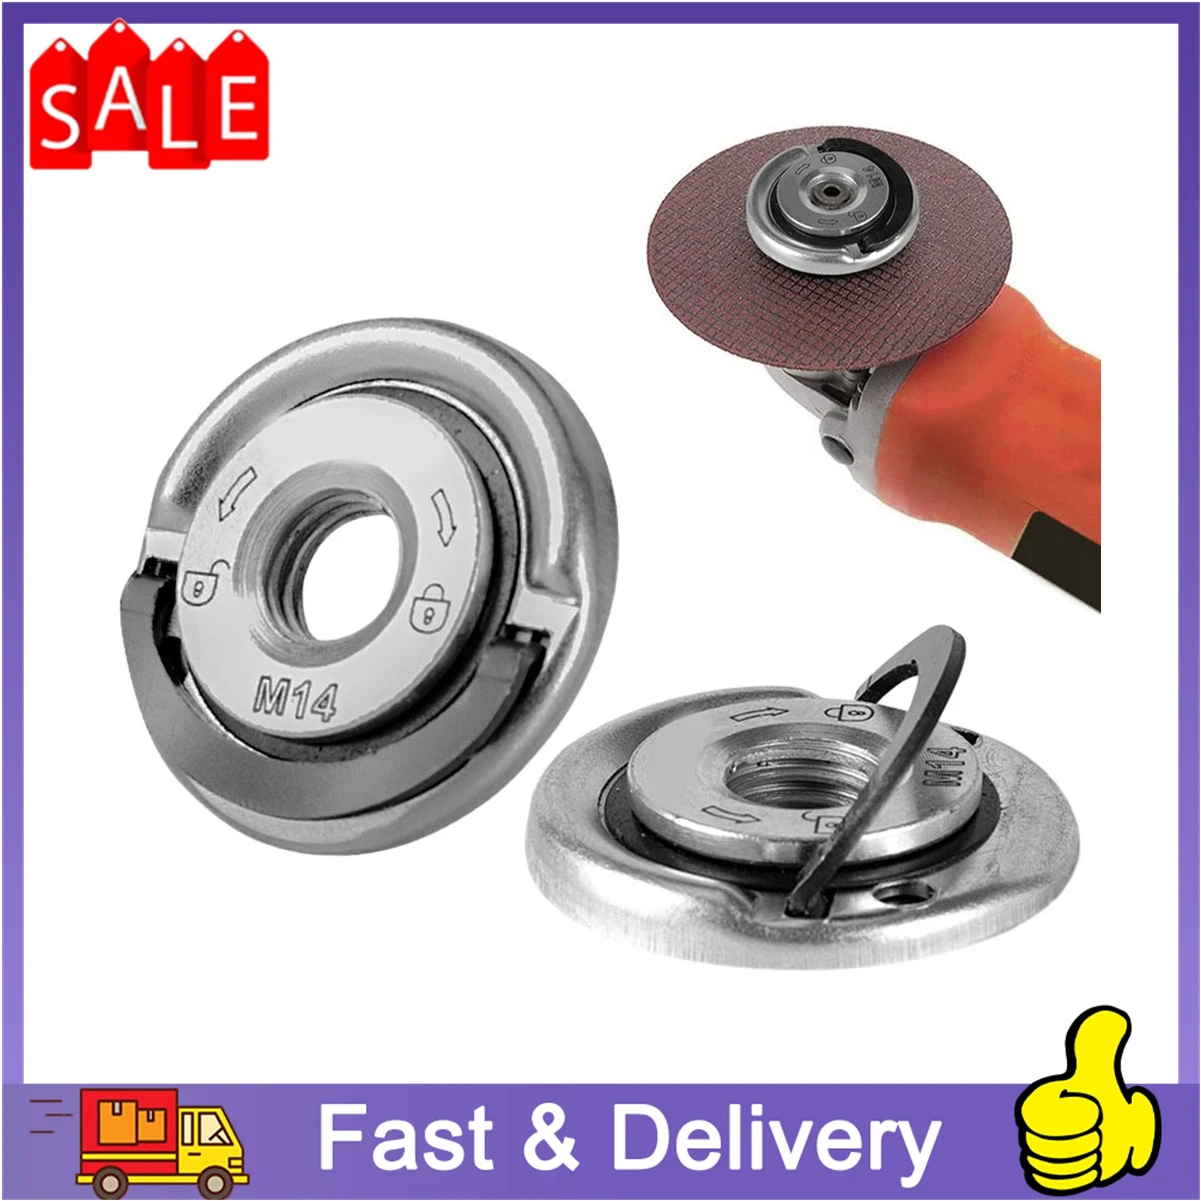 Quick Release Flange Nut M14 Thread Angle Grinder Release Locking Nut Pressing Plate For Angle Grinder Clamping Flange Accessory 1pcs m14 hexagon flange nut for angle grinder disc quick change locking flange nut quick release power tool accessory